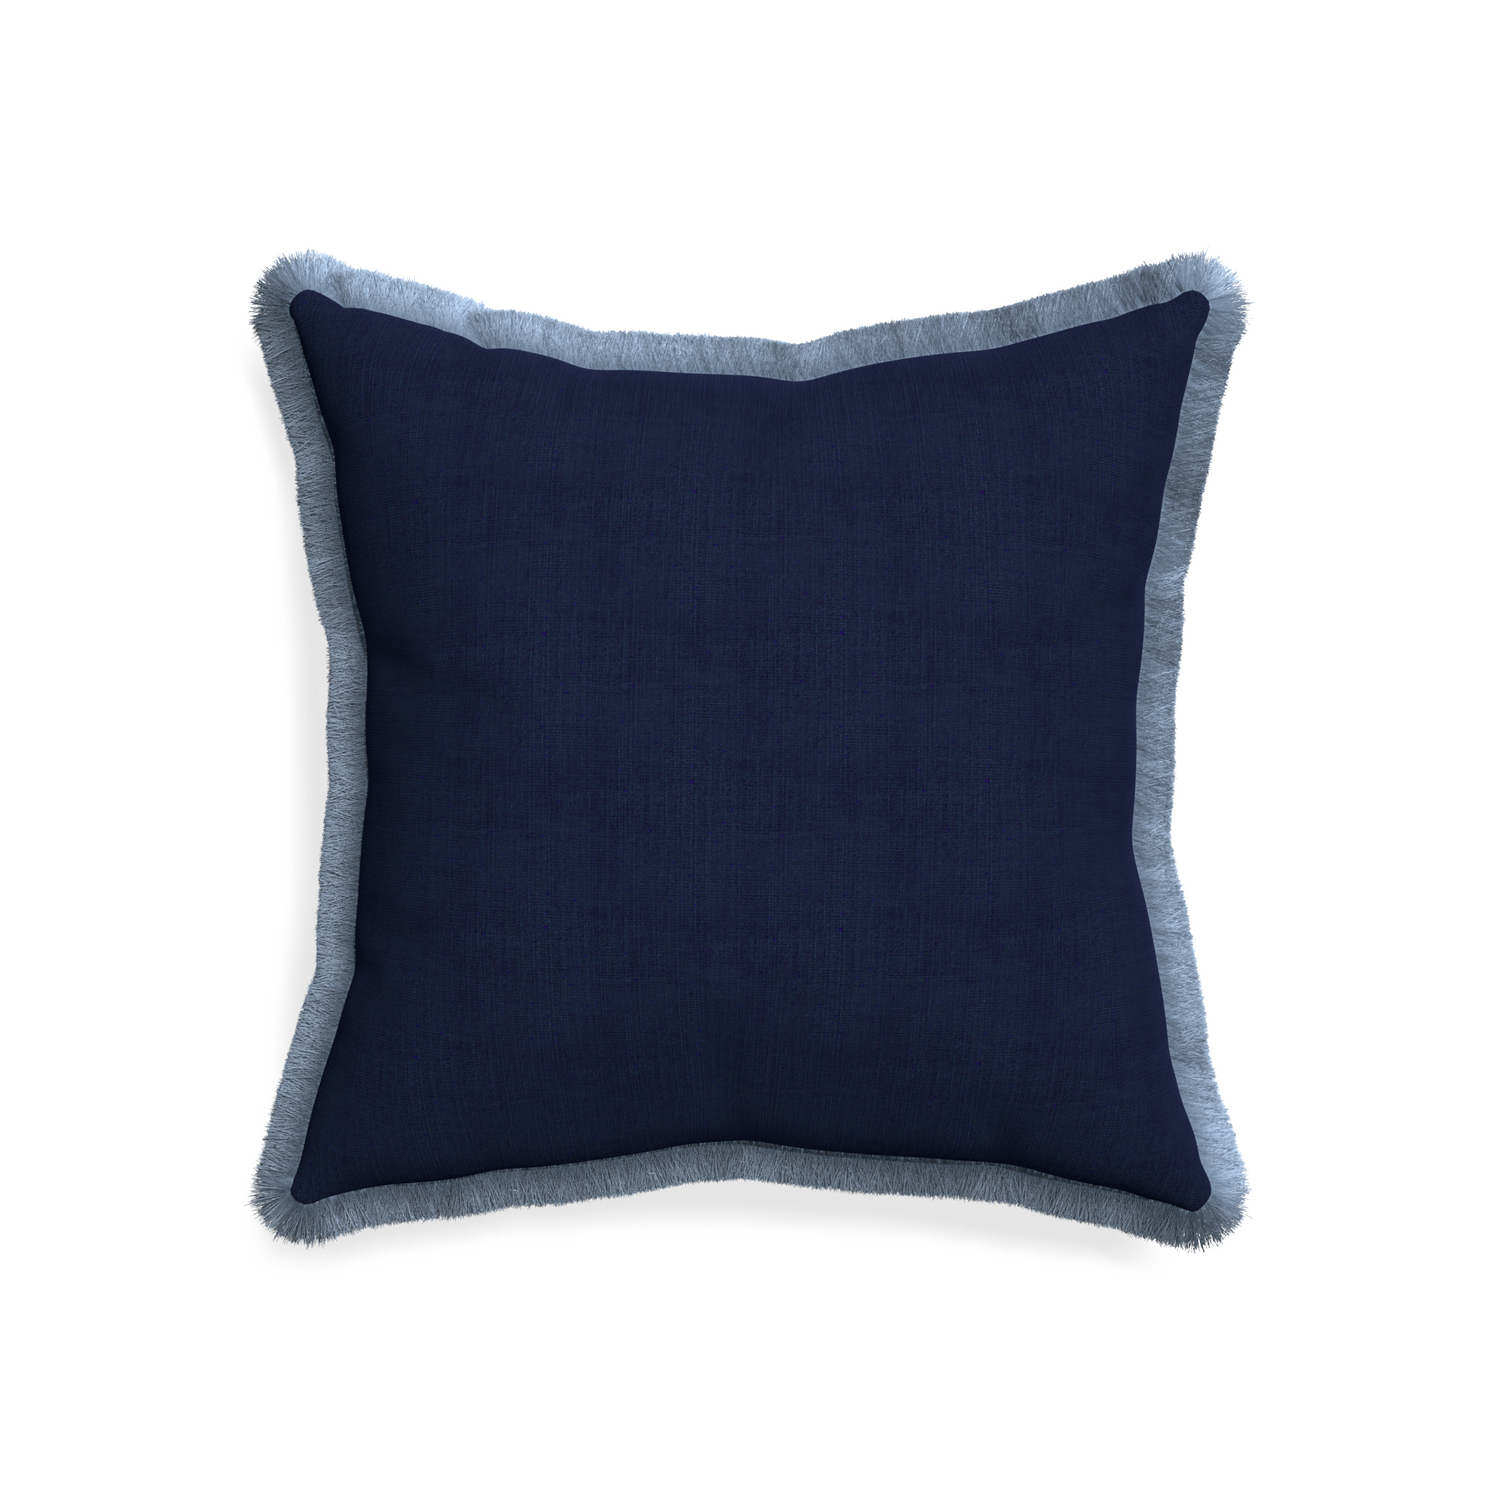 20-square midnight custom navy bluepillow with sky fringe on white background